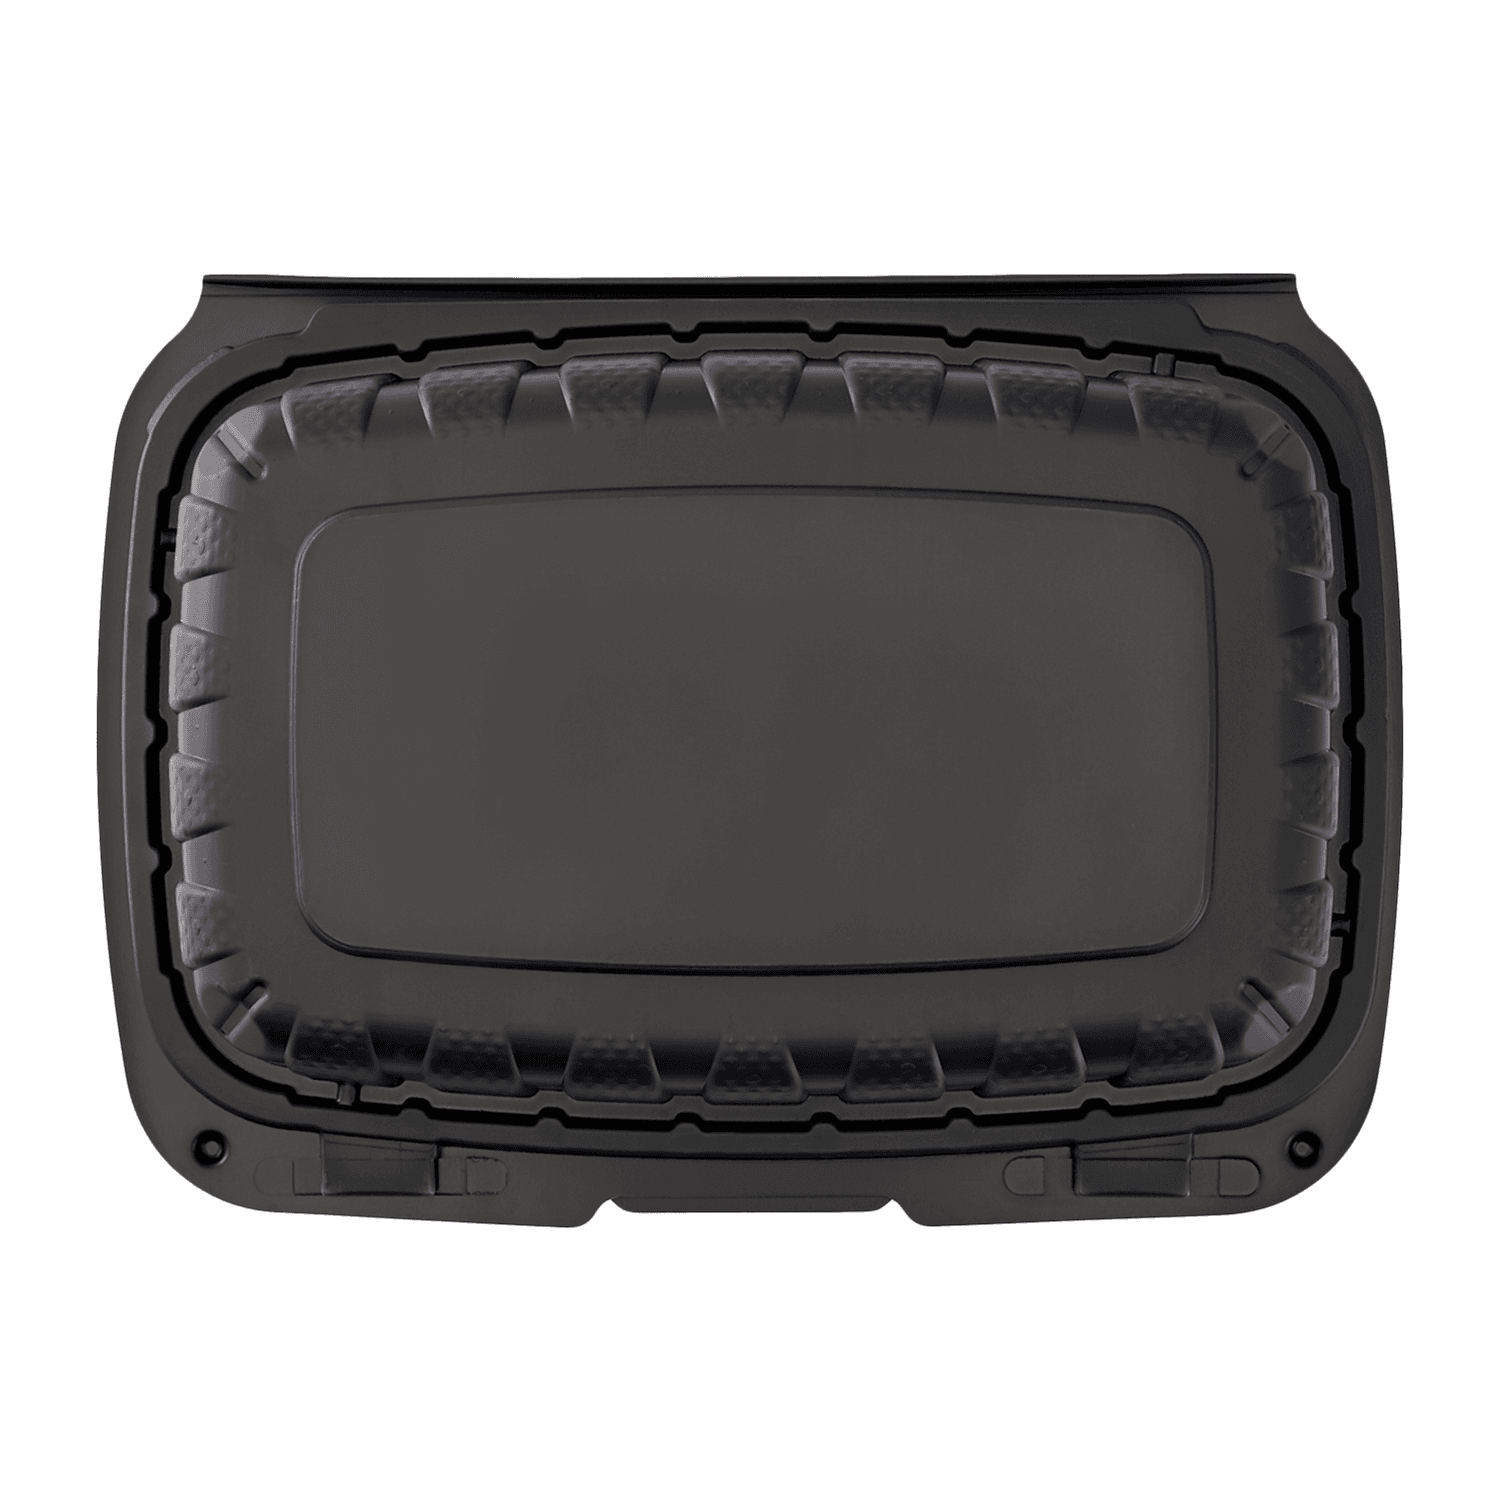 Karat Earth 9" x 6" Mineral Filled PP Hinged Container, Black - 250 pcs